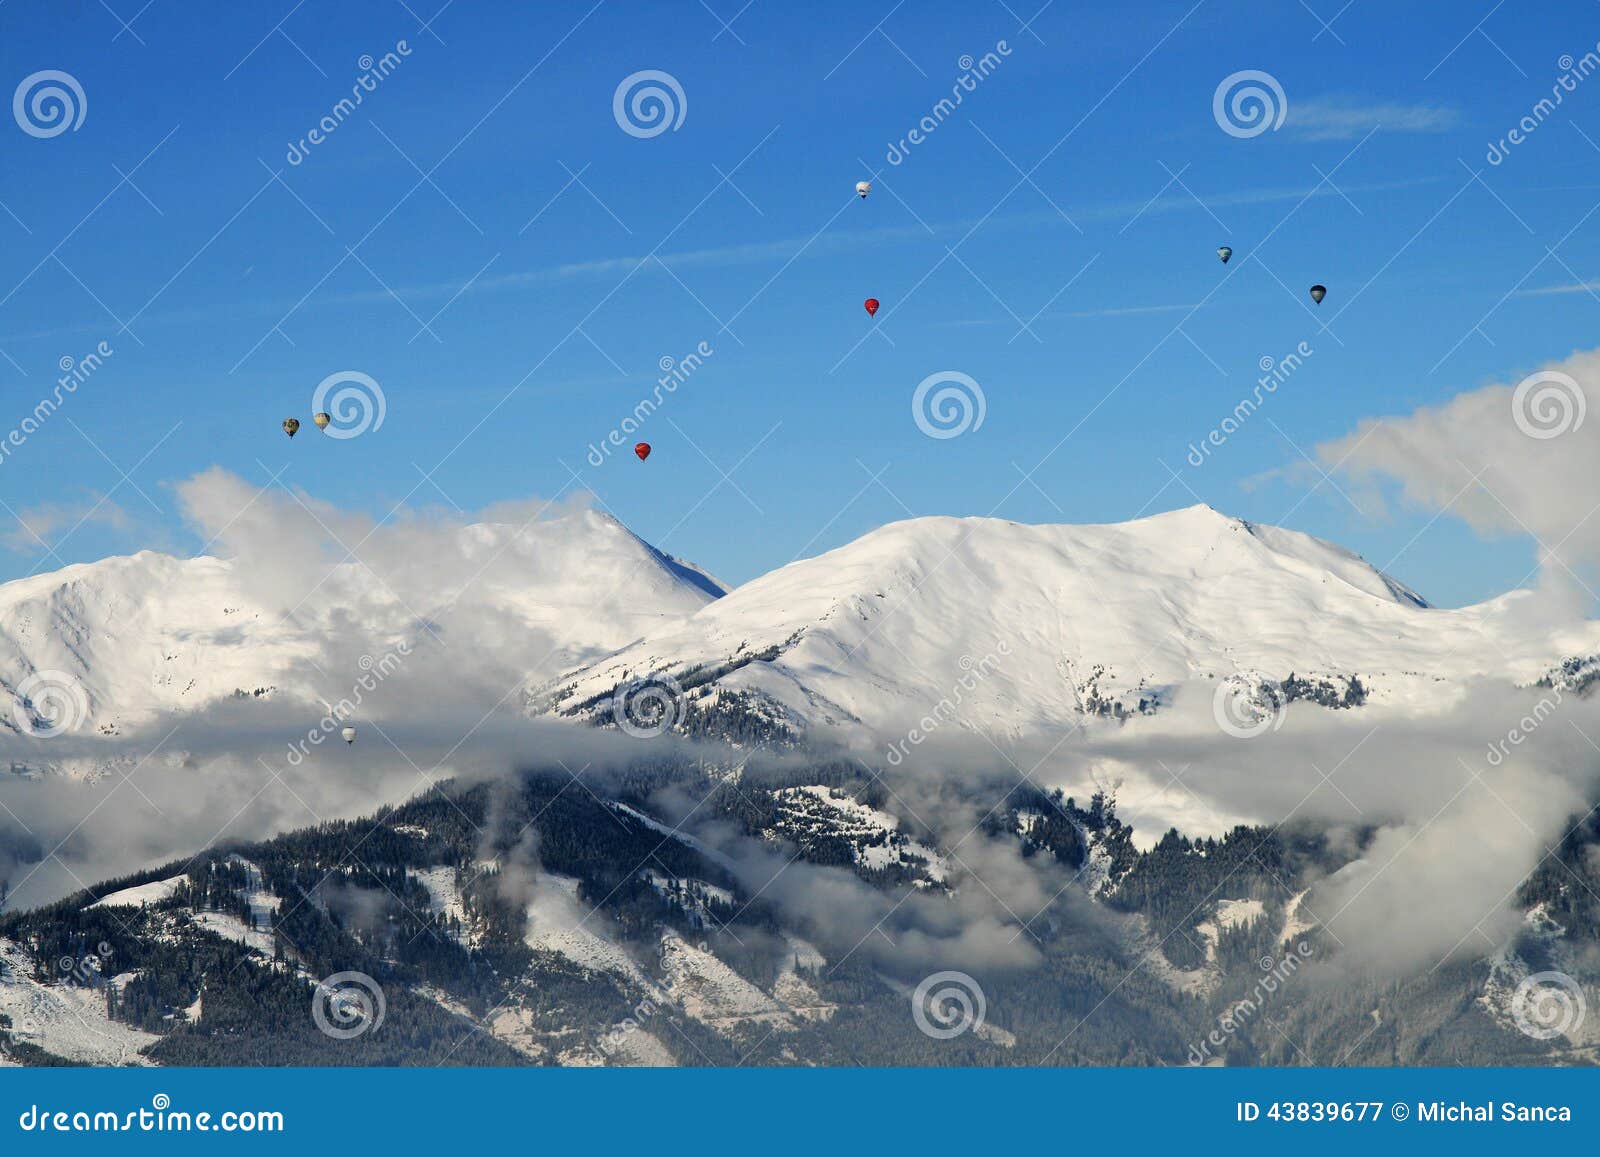 hot air ballooning over the tops of mountains